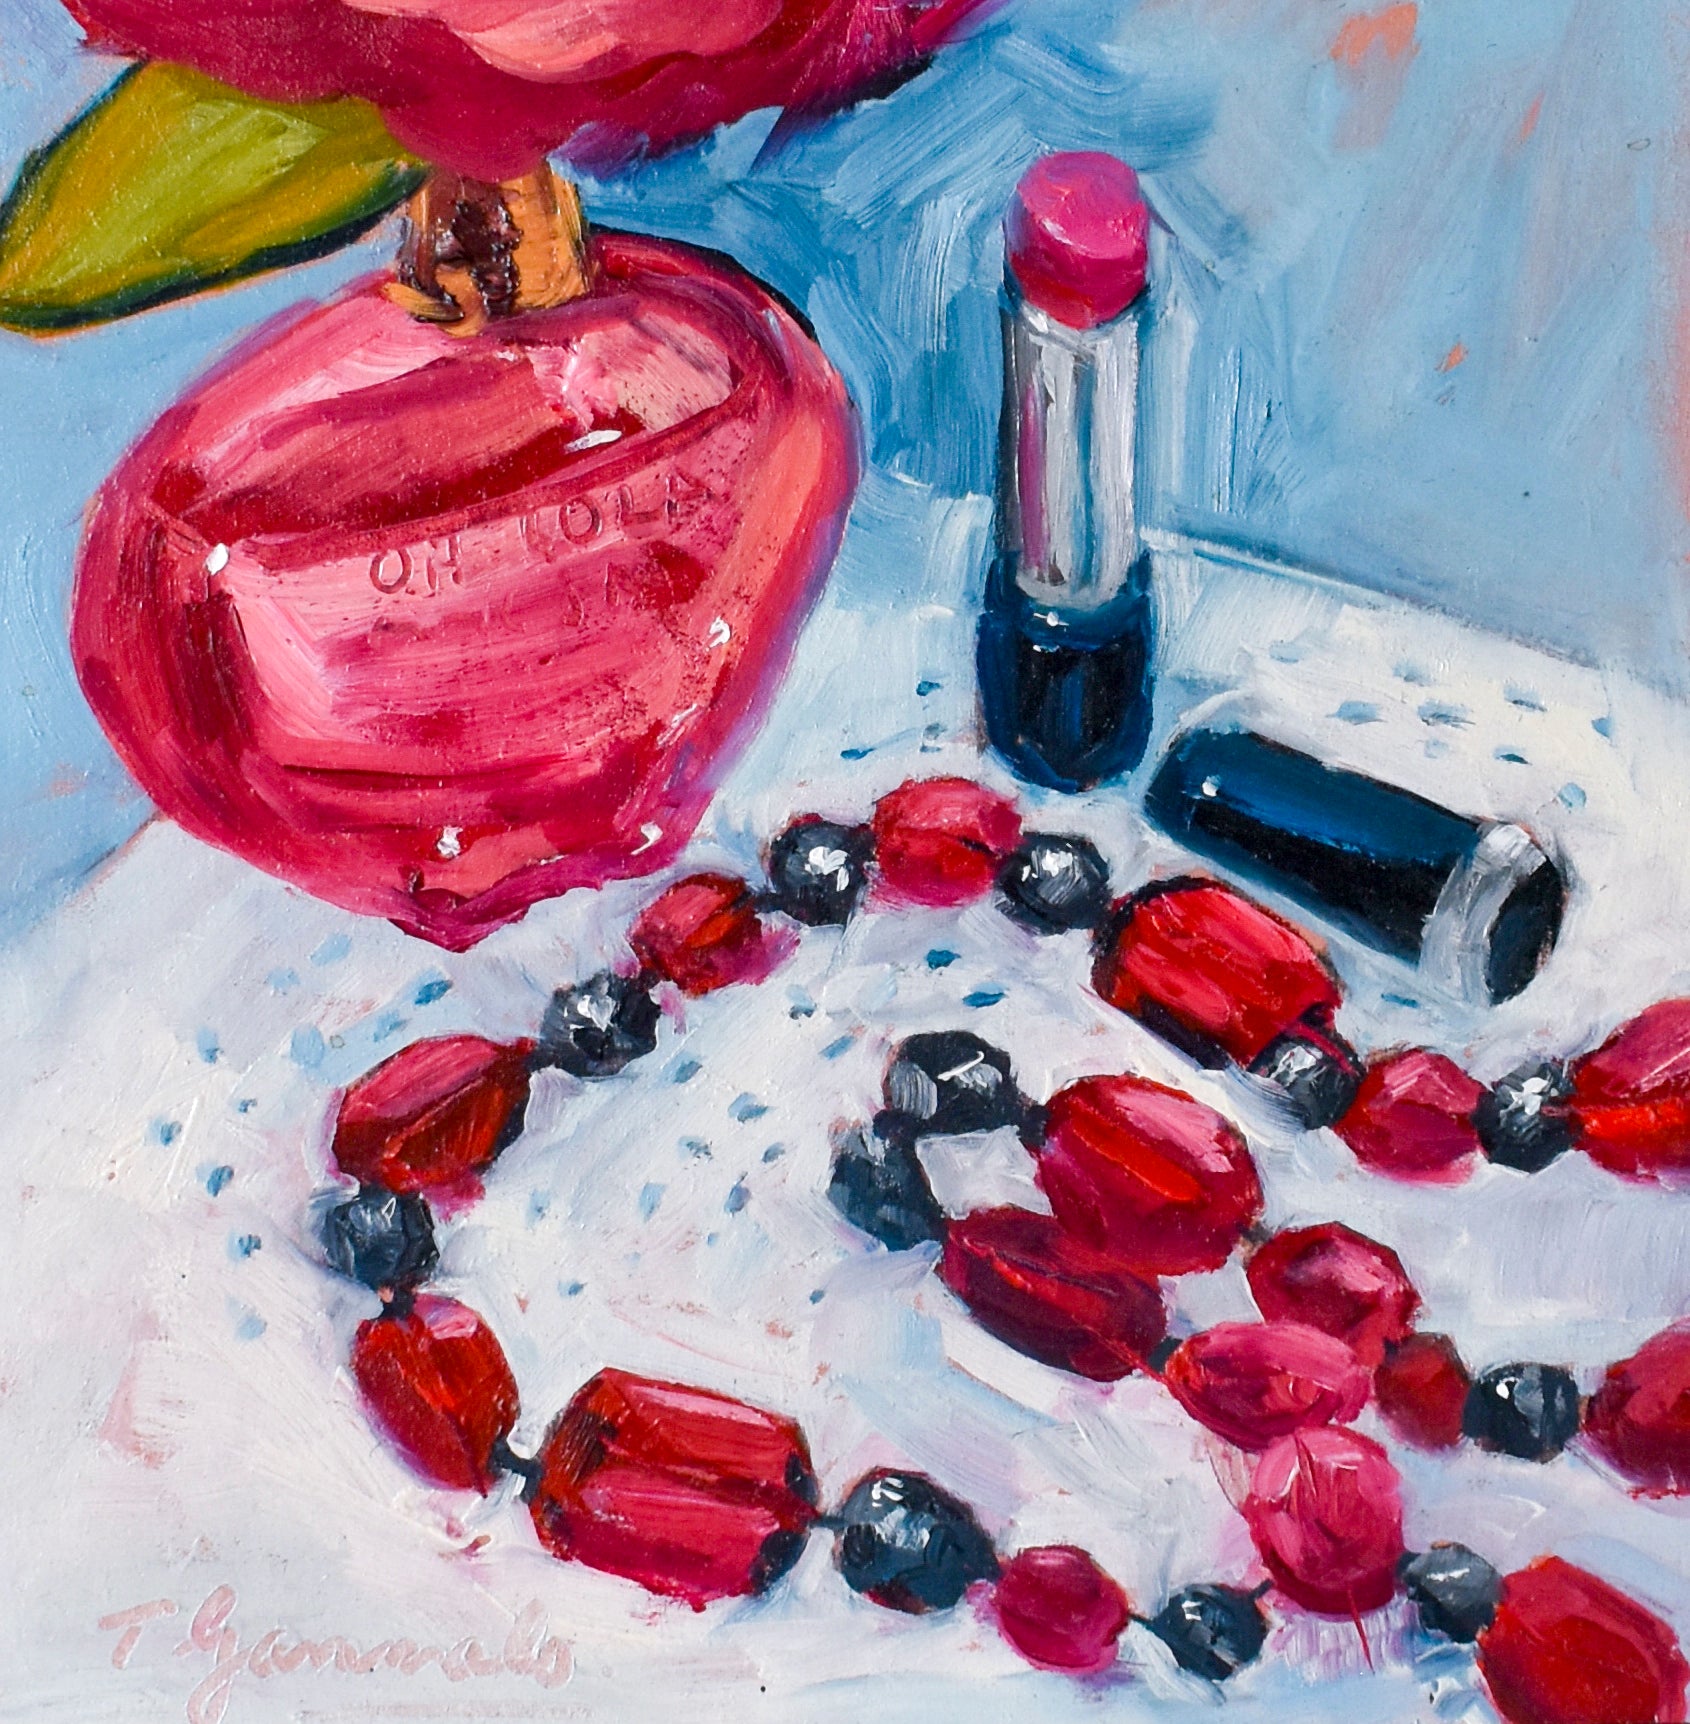 Painting depicts a vanity table top with a perfume bottle, lipstick and red beaded necklace.